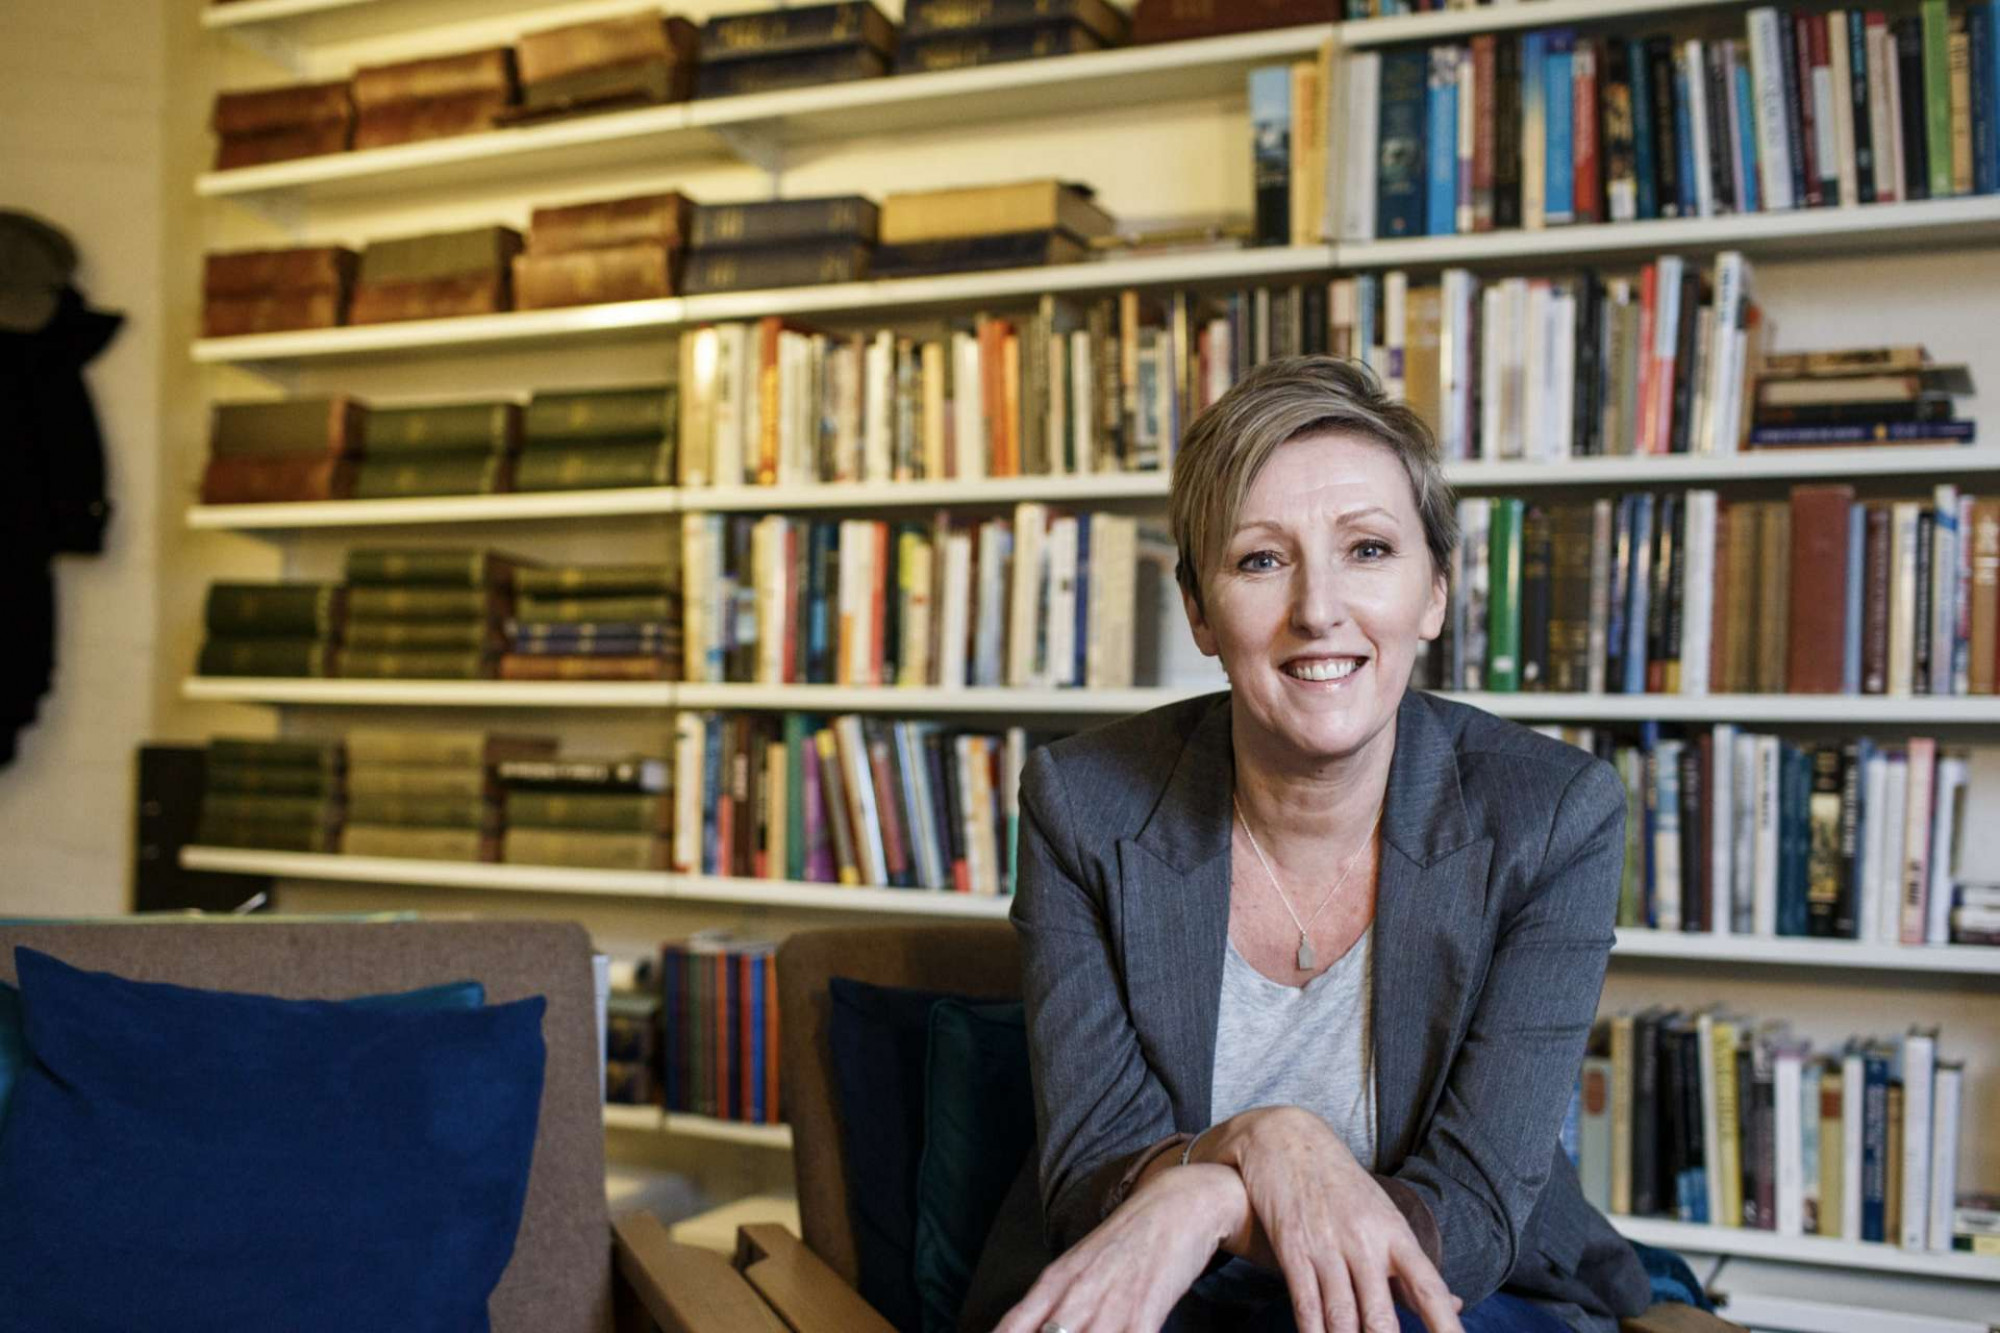 Dr Julie Anderson sits in front of bookshelves.